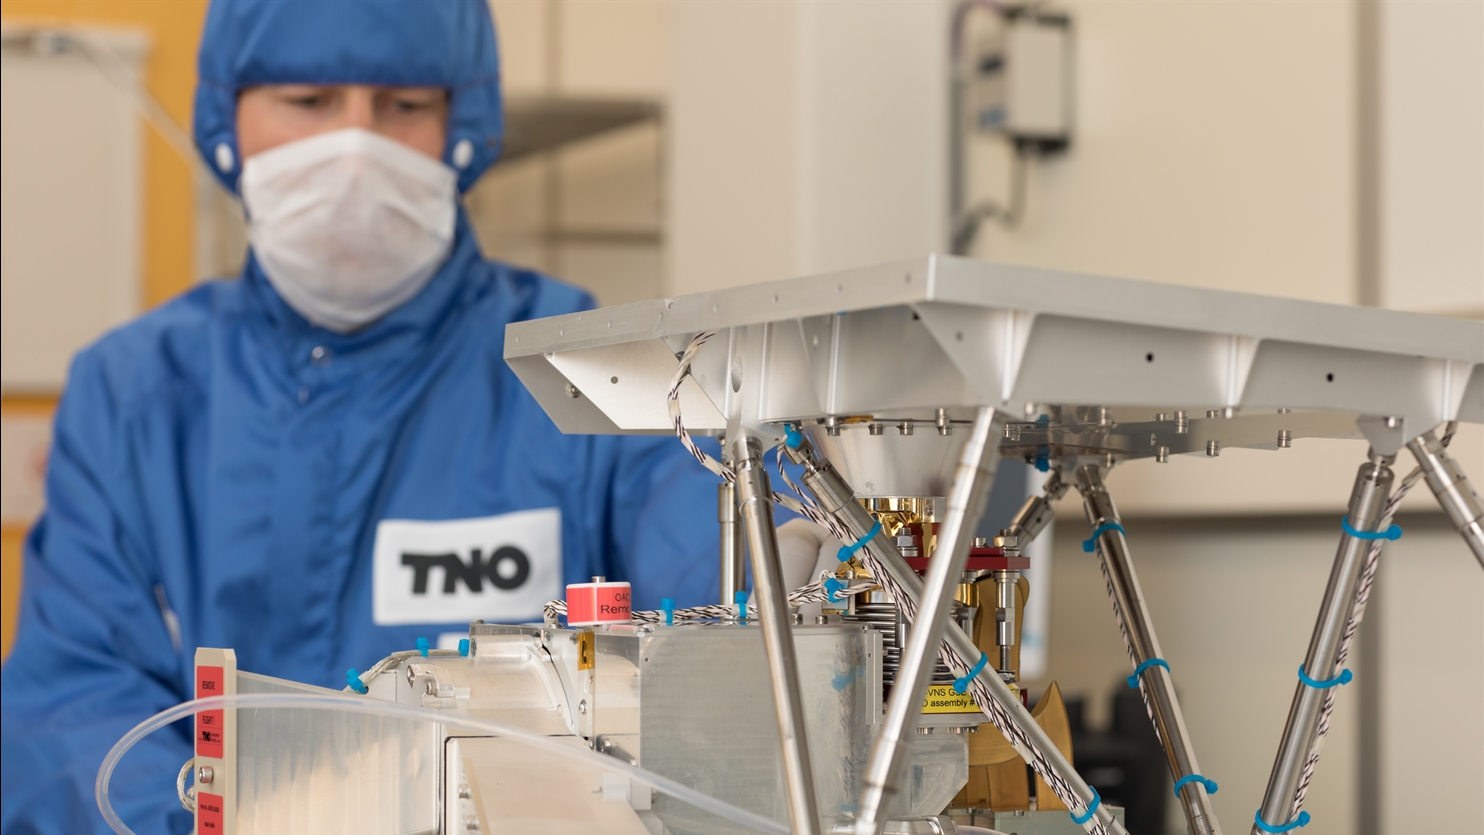 TNO scientist with the Multi Spectral Imager (MSI)